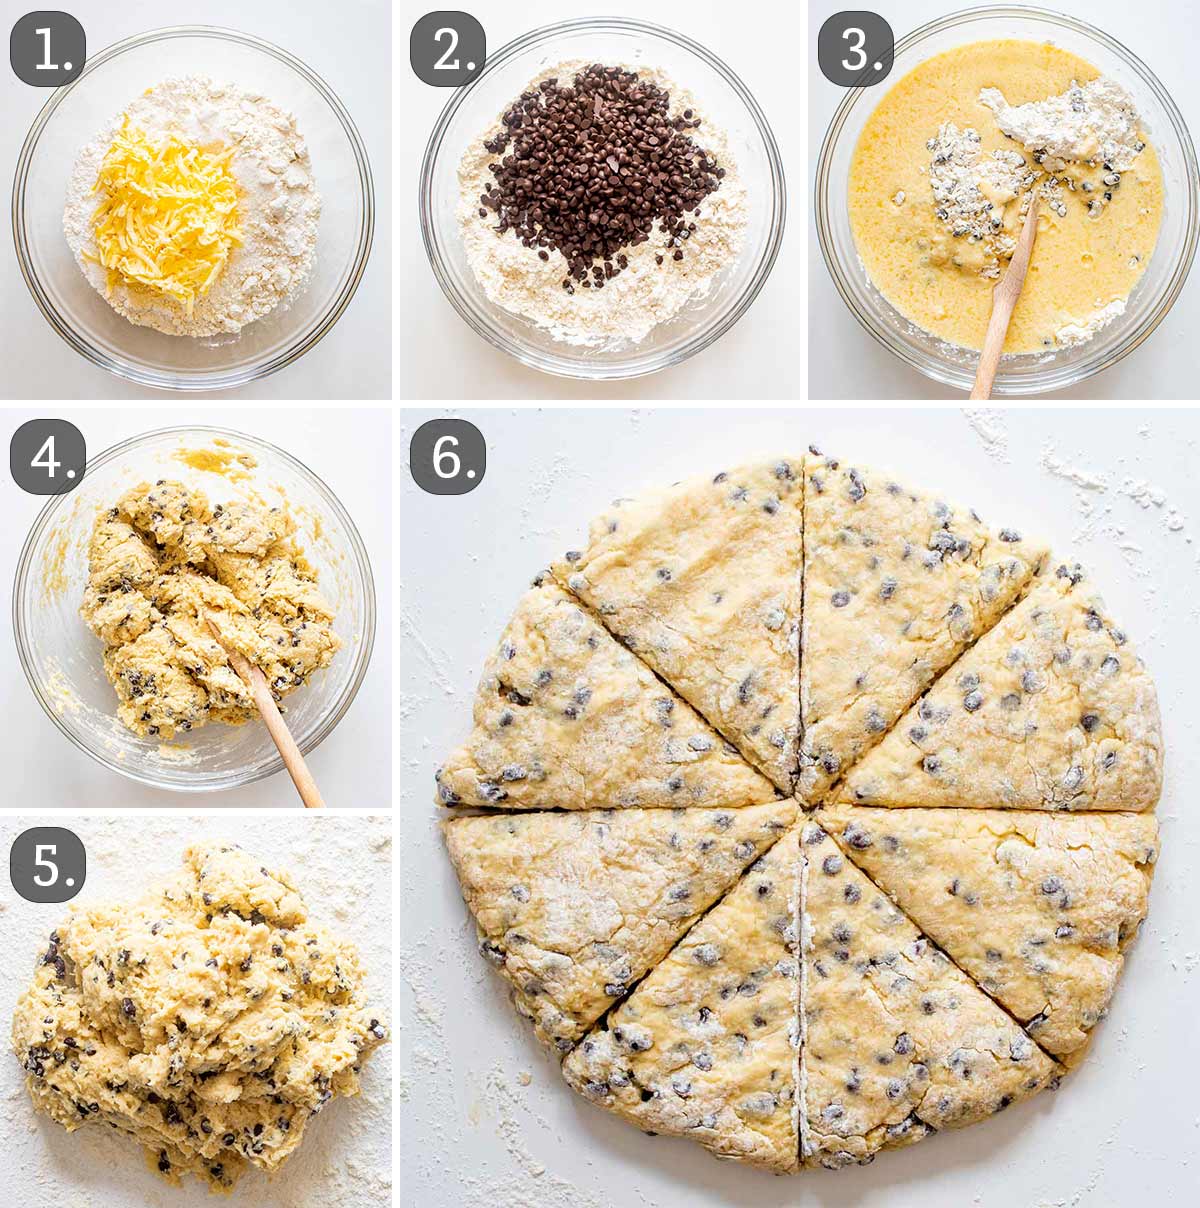 process shots showing how to make chocolate chip scones.